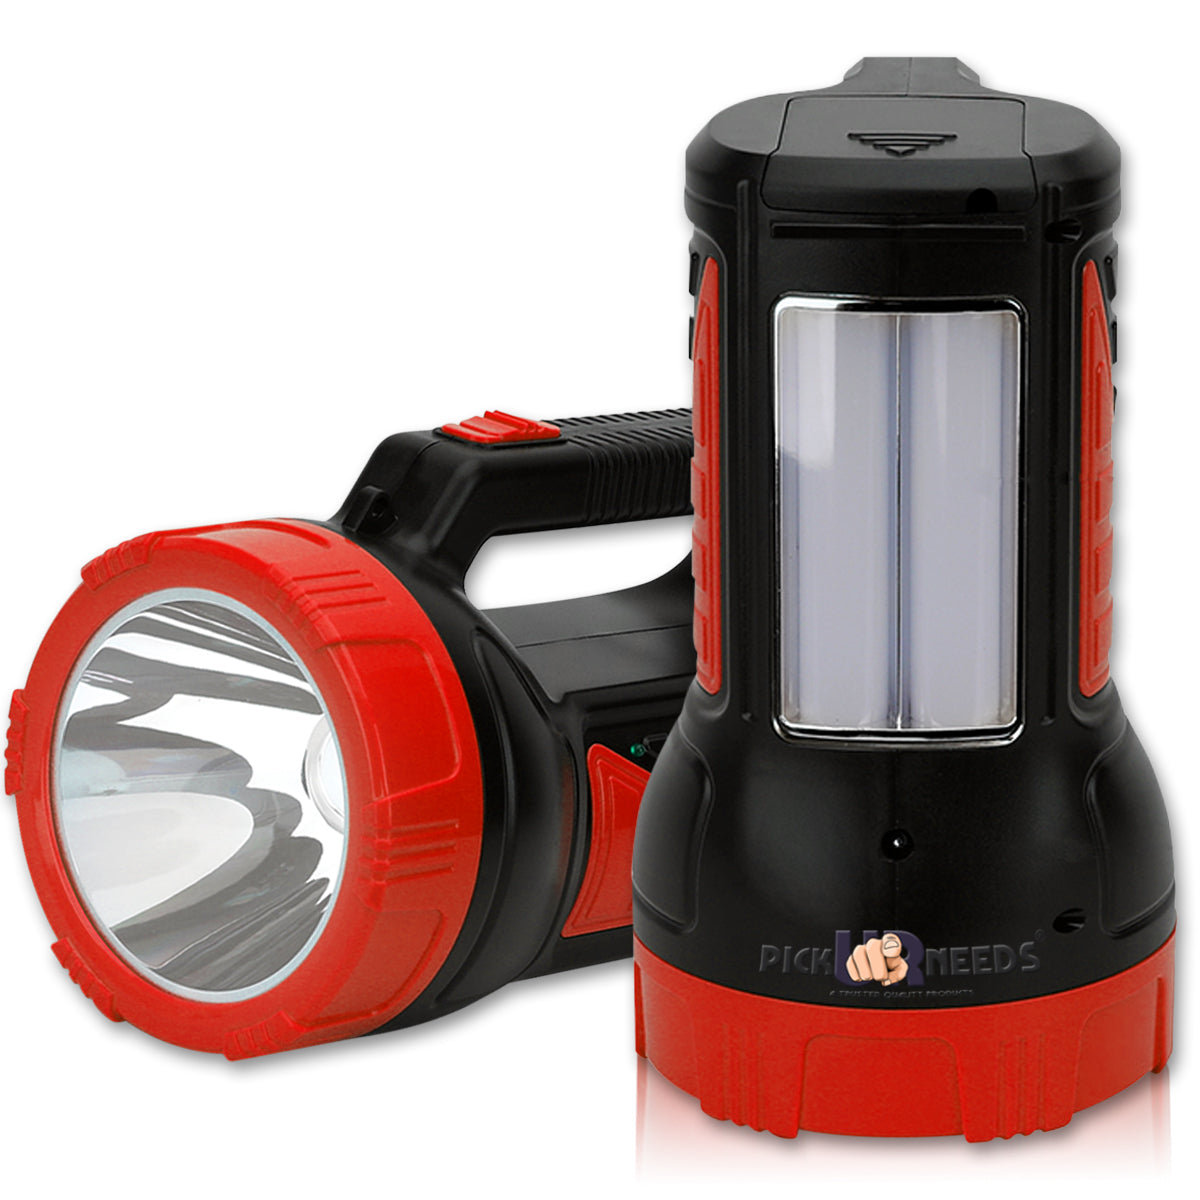 Pick Ur Needs 2 In 1 Rechargeable Long Range Emergency Search Torch Light With Side Tube Light